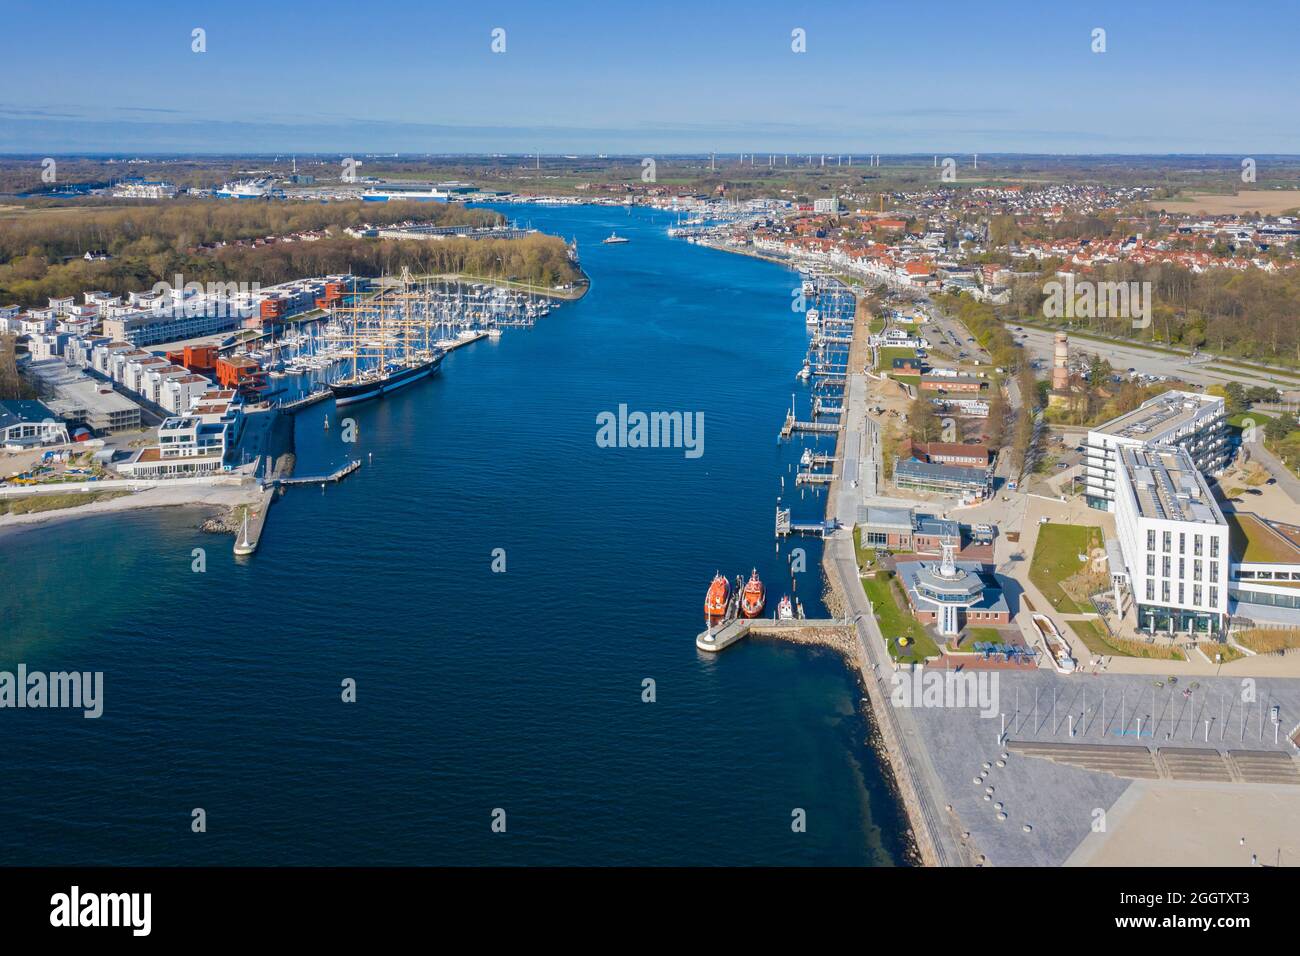 Aerial view over port / harbour at mouth of the river Trave at seaside resort Travemünde, Hanseatic City of Lübeck, Schleswig-Holstein, Germany Stock Photo